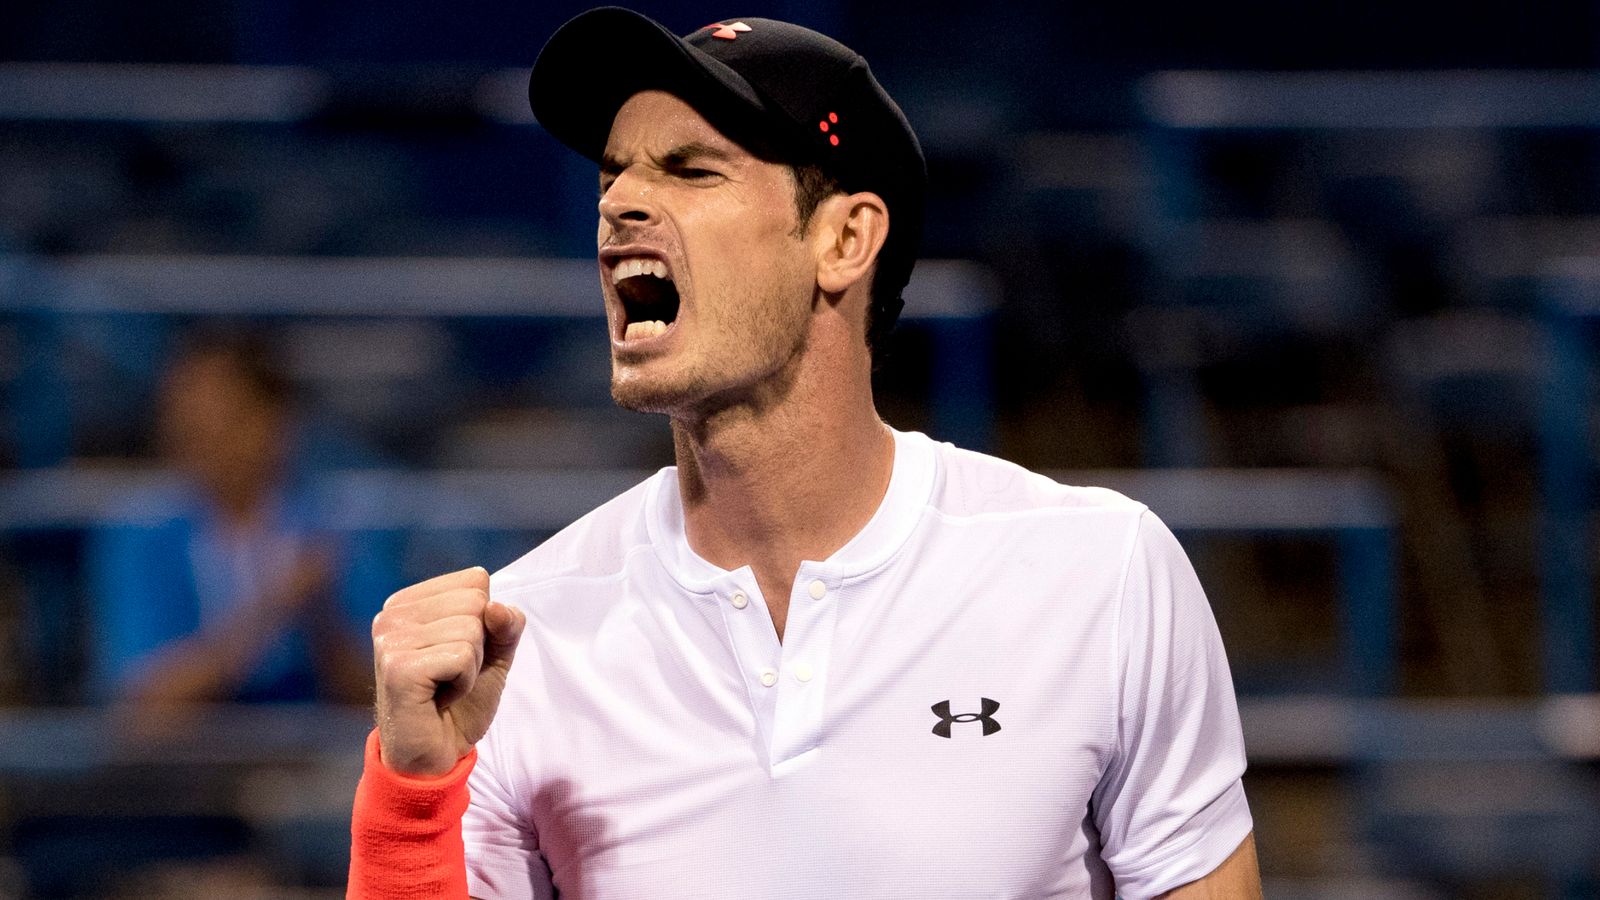 What’s next for Andy Murray? Washington & Montreal on the agenda before US Open